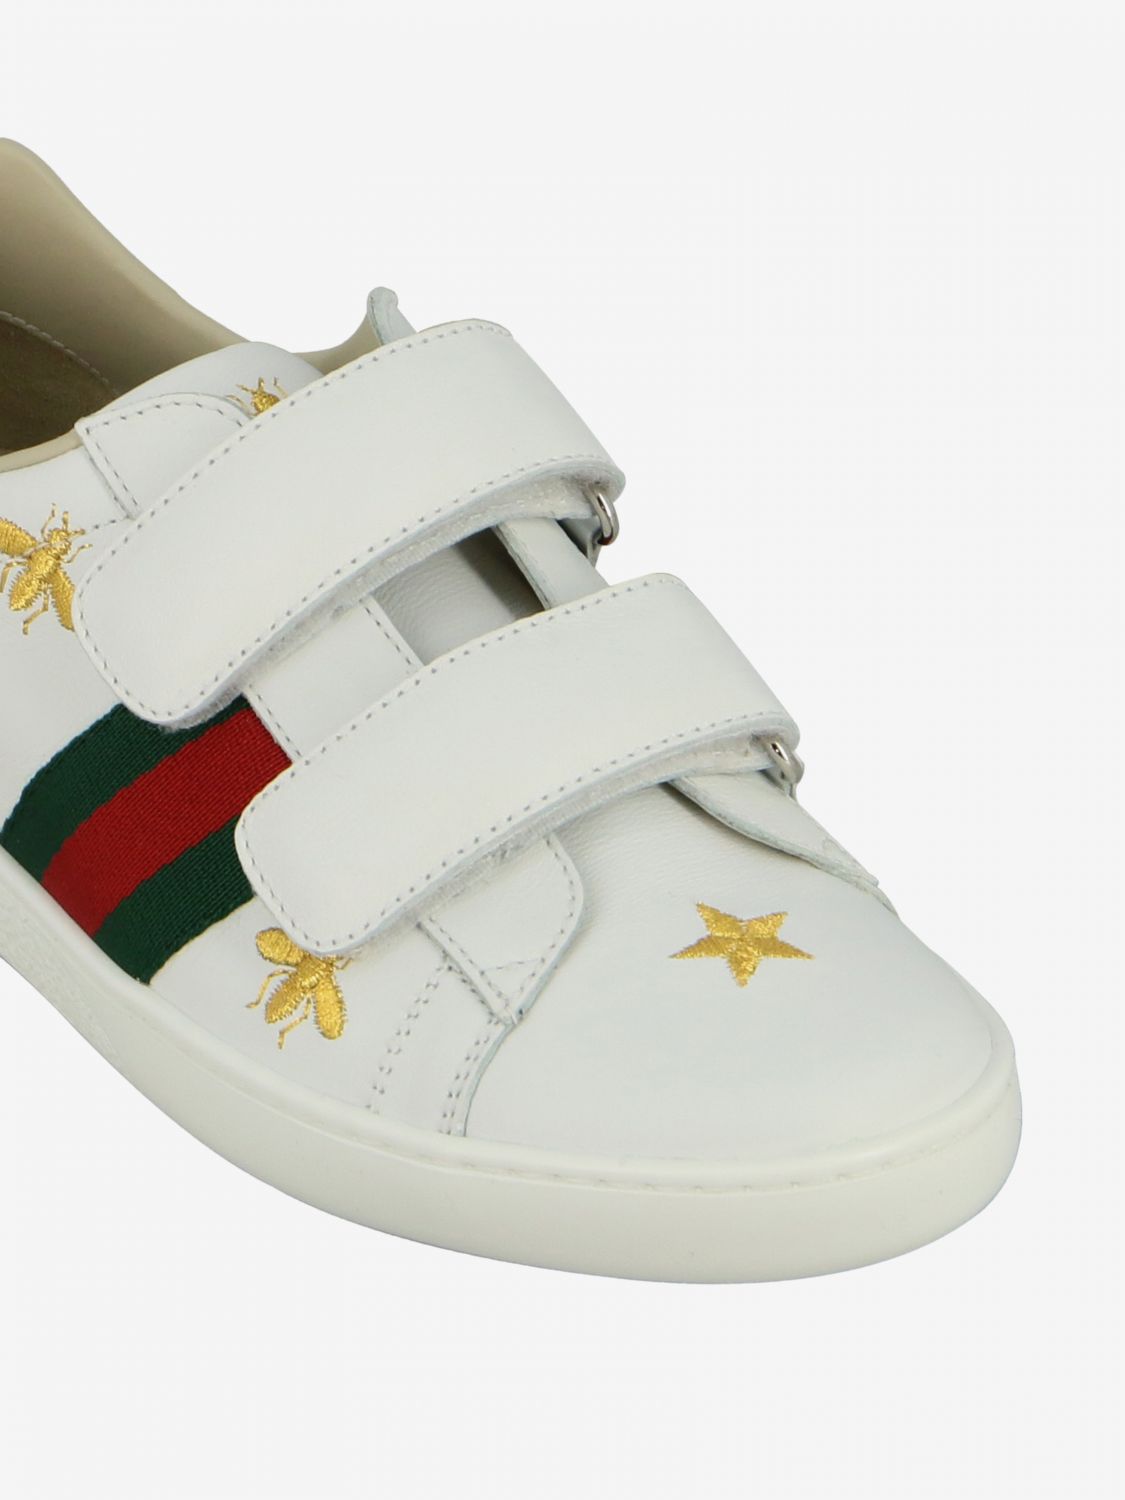 GUCCI: New Ace sneakers in leather with strap buckles | Shoes Gucci ...